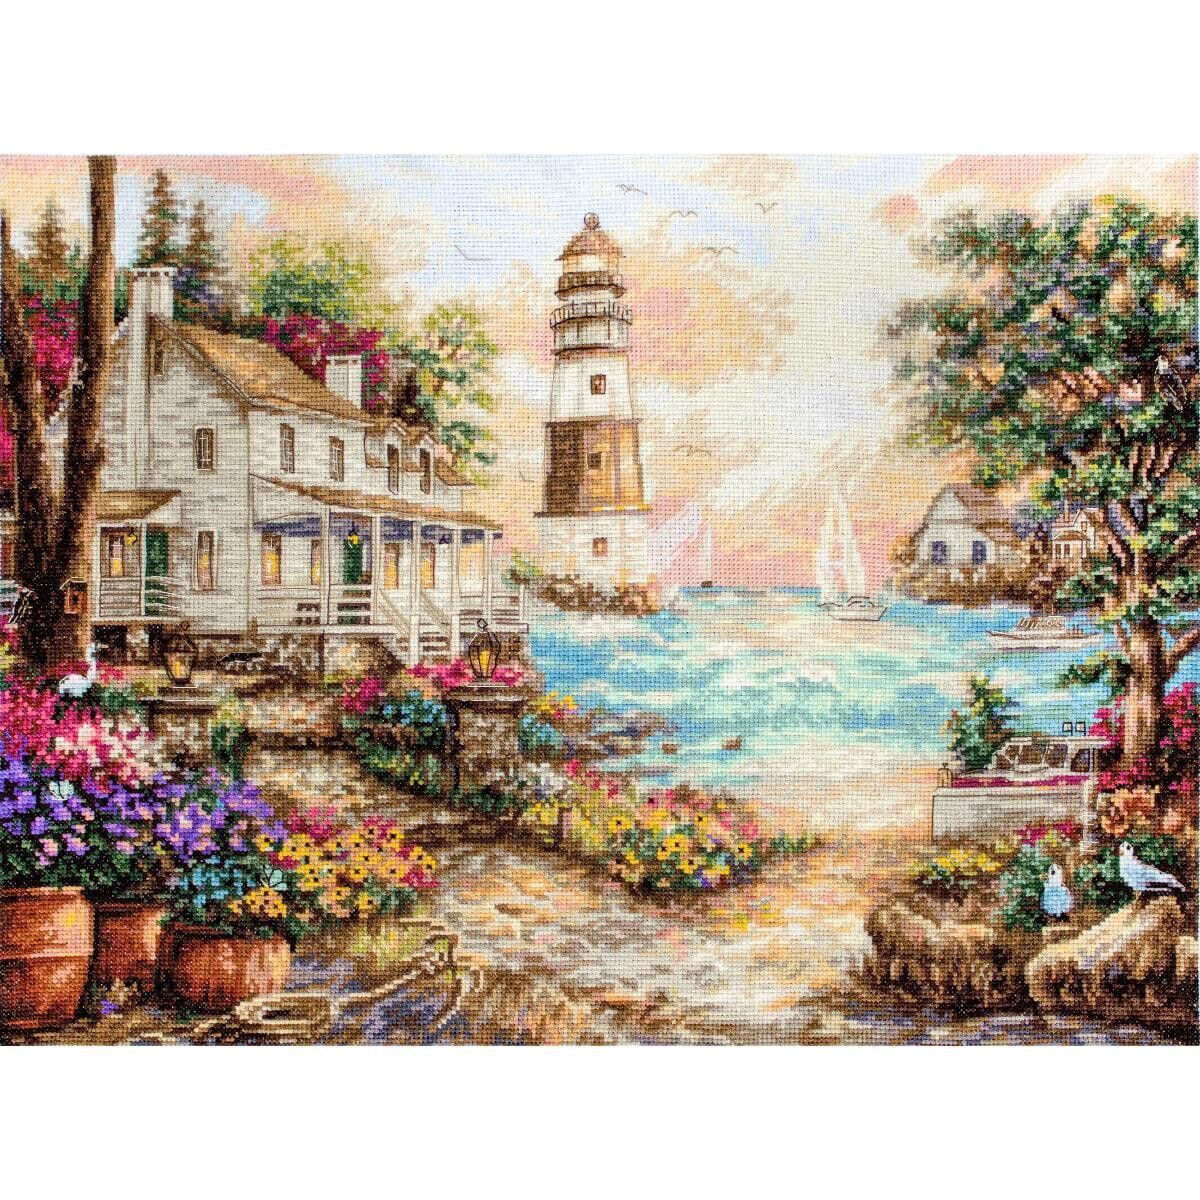 Letistitch counted cross stitch kit "Cottage by the...